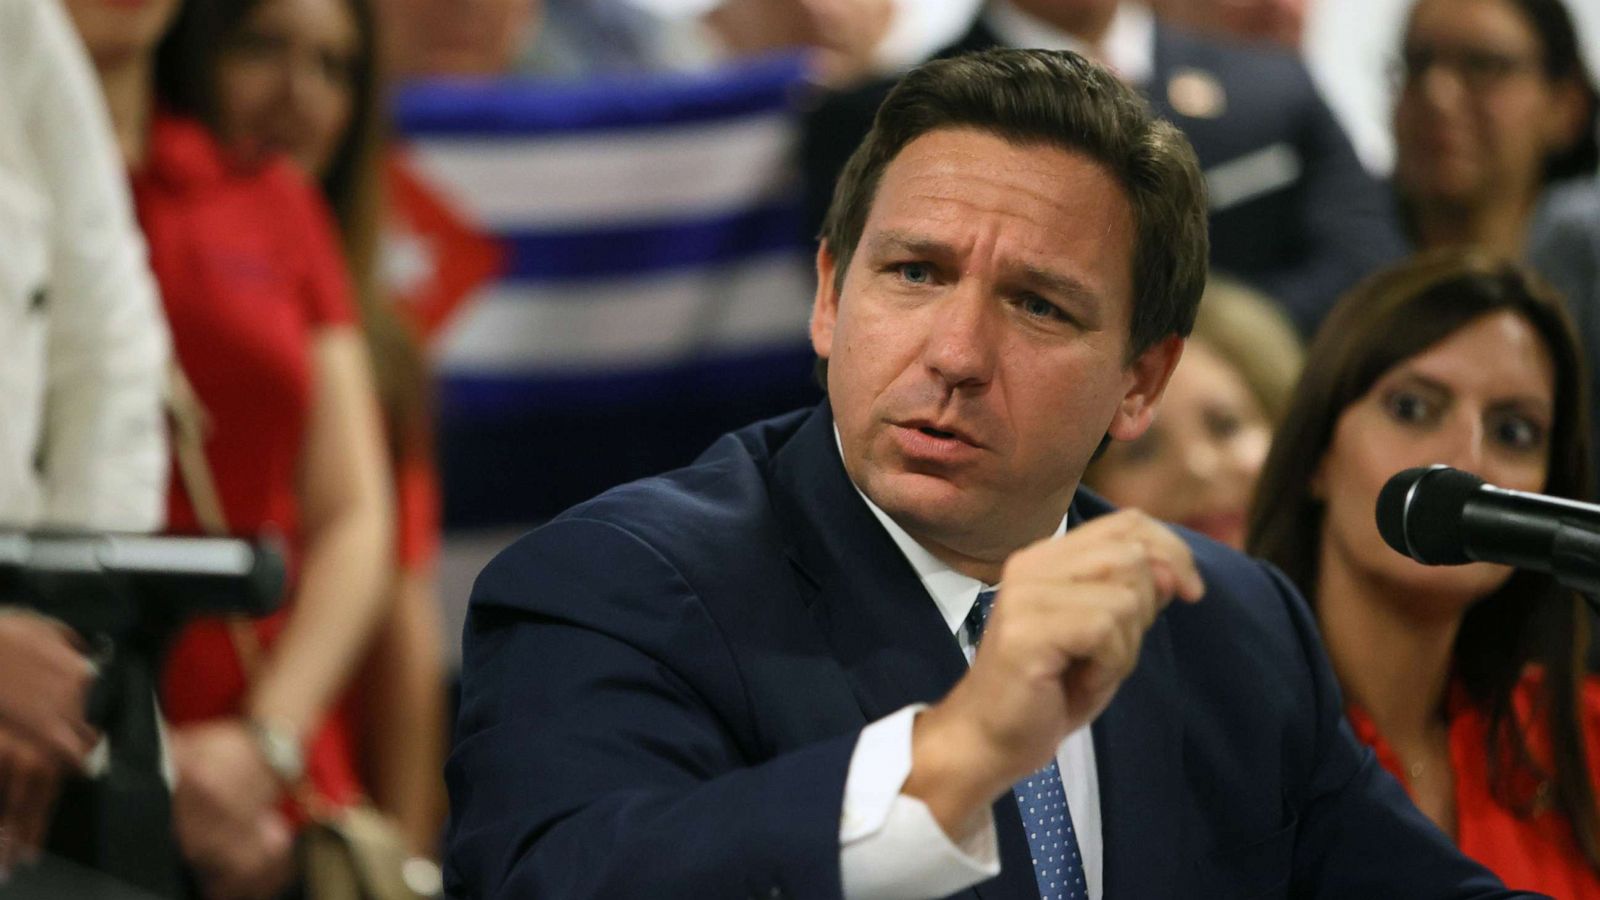 Ron “Don't Say Gay” DeSantis was just caught in a blatant lie